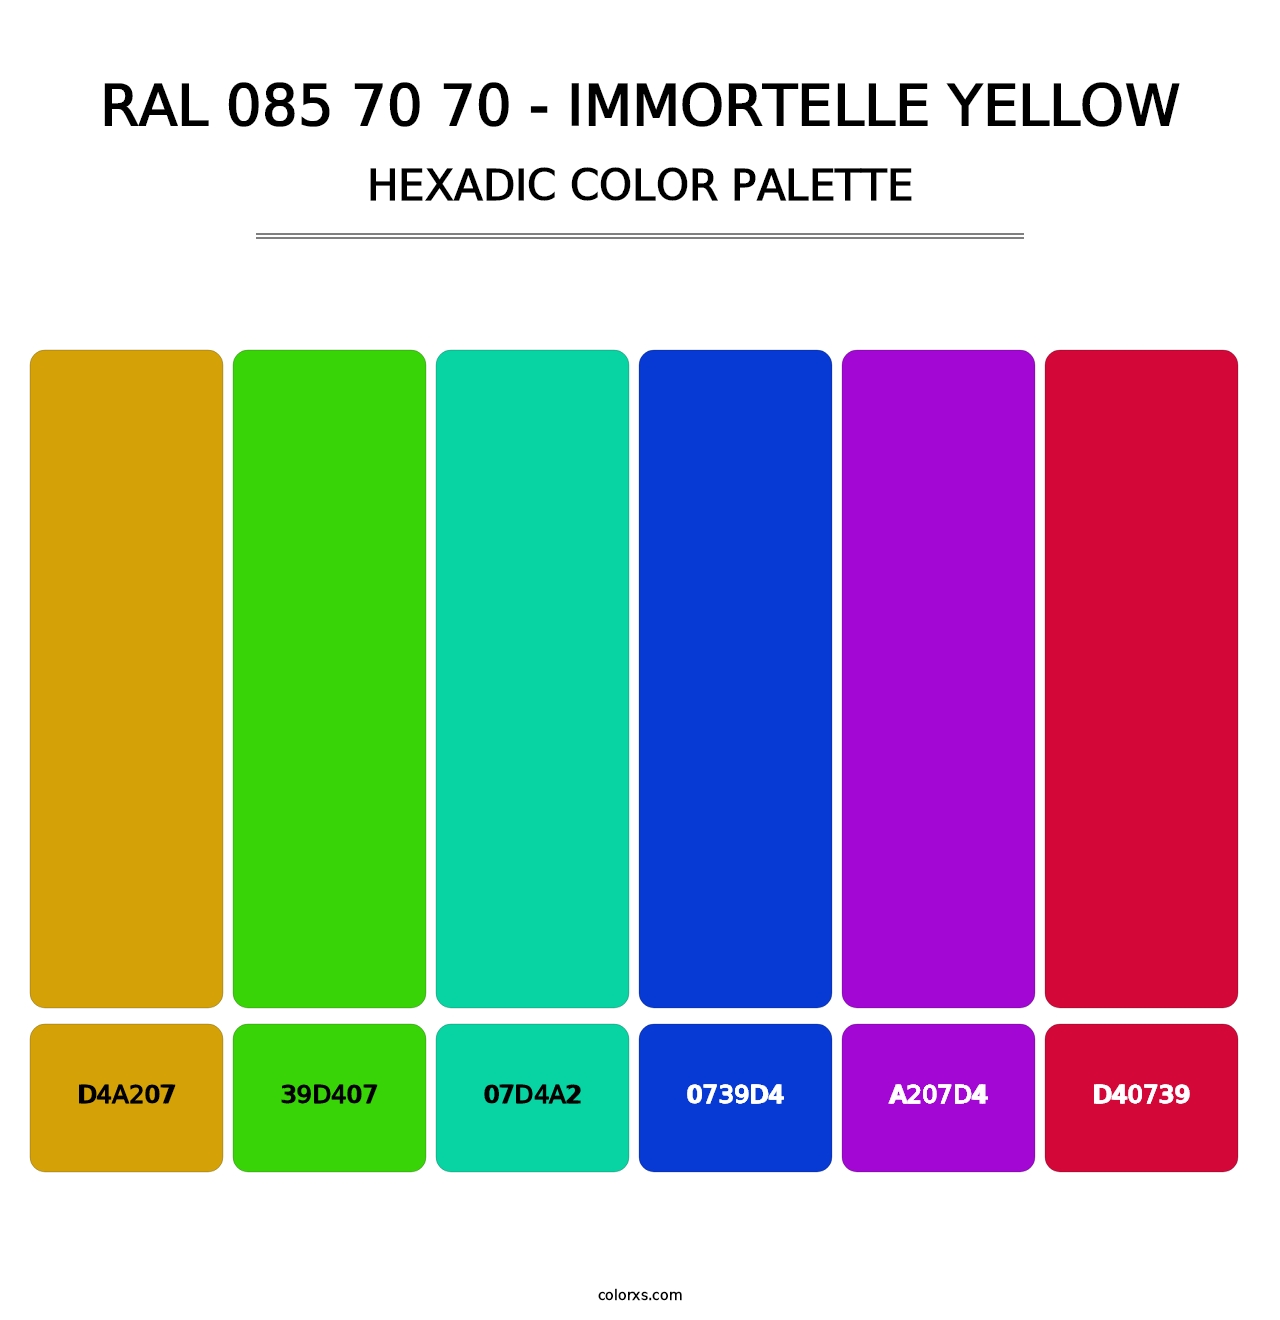 RAL 085 70 70 - Immortelle Yellow - Hexadic Color Palette